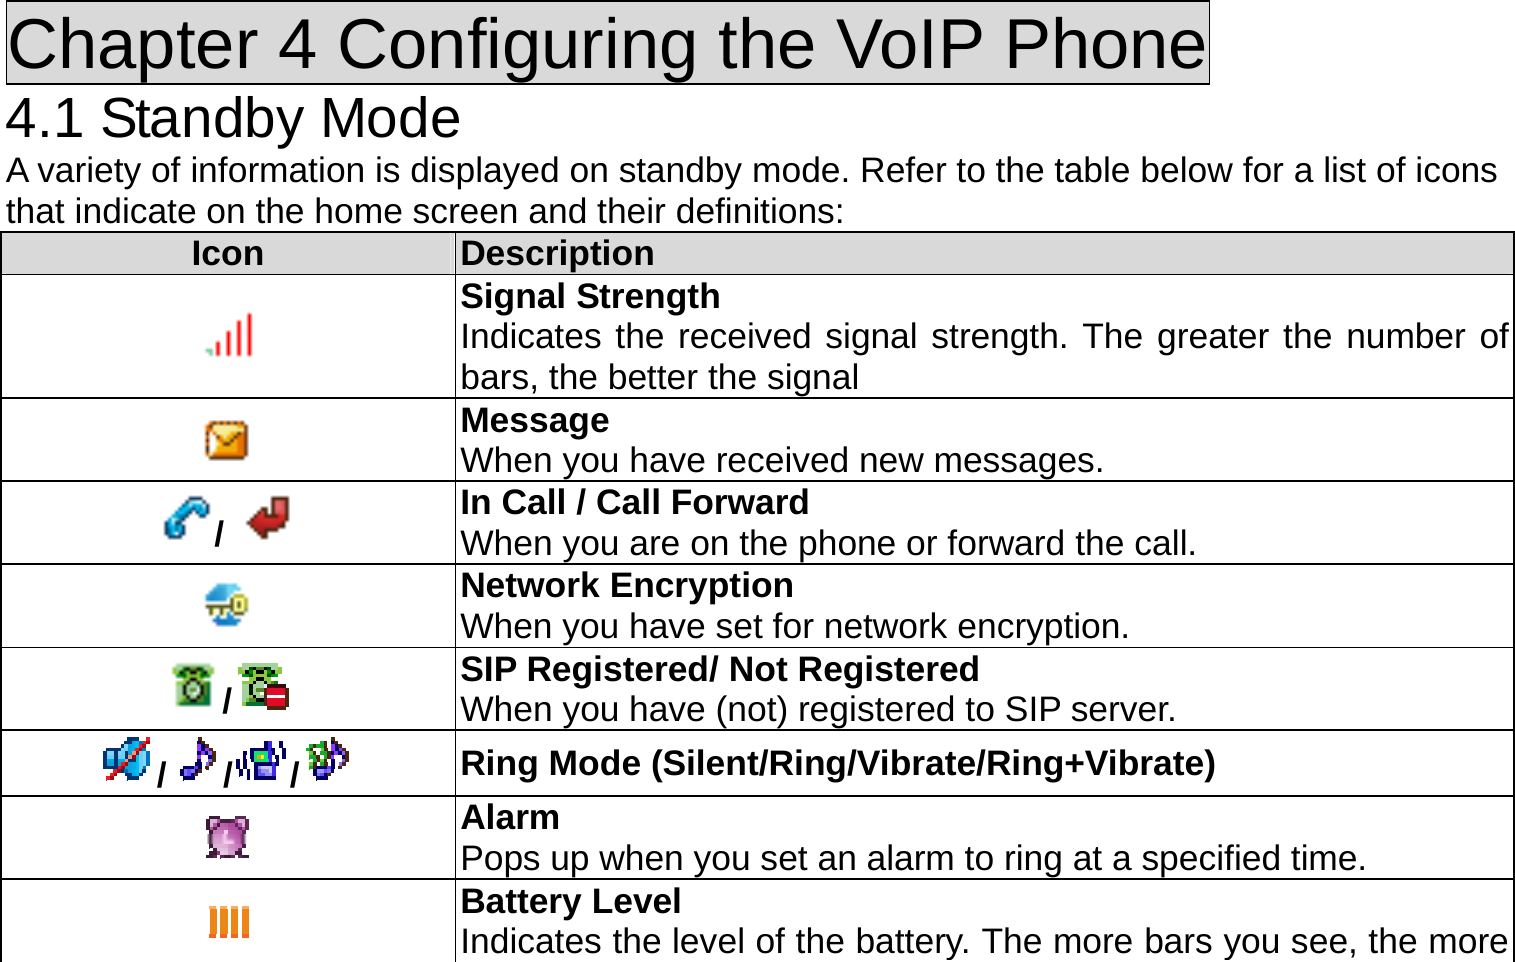 Chapter 4 Configuring the VoIP Phone 4.1 Standby Mode A variety of information is displayed on standby mode. Refer to the table below for a list of icons that indicate on the home screen and their definitions: Icon  Description  Signal Strength Indicates the received signal strength. The greater the number of bars, the better the signal  Message When you have received new messages. /   In Call / Call Forward When you are on the phone or forward the call.  Network Encryption When you have set for network encryption. /   SIP Registered/ Not Registered When you have (not) registered to SIP server. / / /   Ring Mode (Silent/Ring/Vibrate/Ring+Vibrate)  Alarm Pops up when you set an alarm to ring at a specified time.  Battery Level Indicates the level of the battery. The more bars you see, the more 